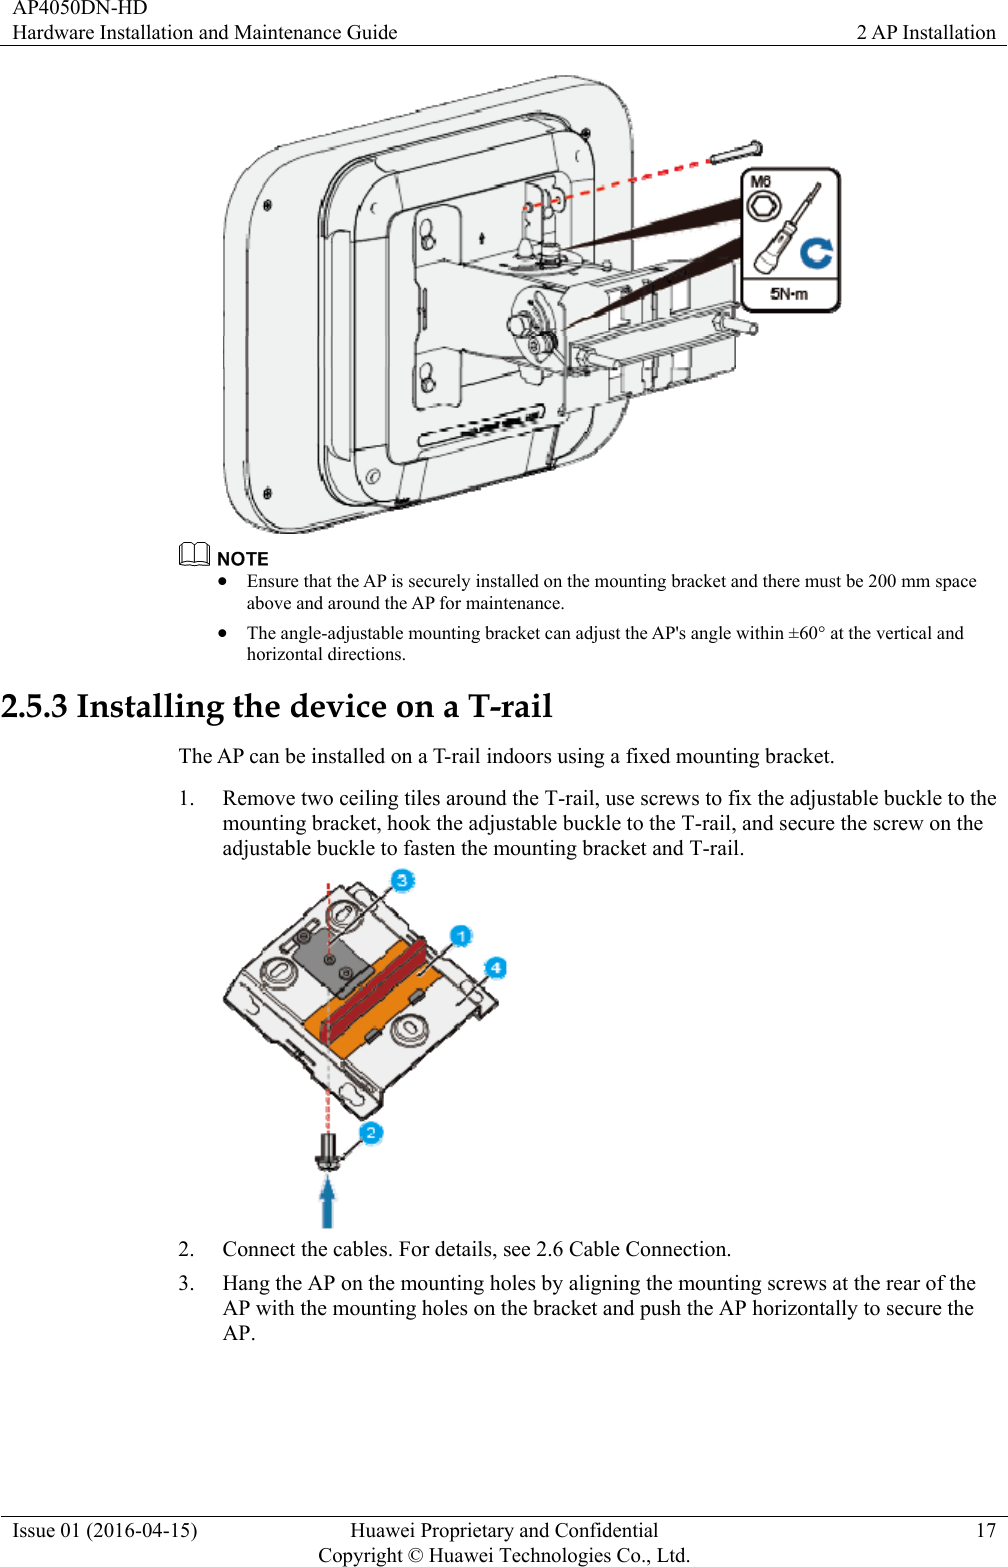 AP4050DN-HD Hardware Installation and Maintenance Guide  2 AP Installation Issue 01 (2016-04-15)  Huawei Proprietary and Confidential         Copyright © Huawei Technologies Co., Ltd.17    Ensure that the AP is securely installed on the mounting bracket and there must be 200 mm space above and around the AP for maintenance.  The angle-adjustable mounting bracket can adjust the AP&apos;s angle within ±60° at the vertical and horizontal directions. 2.5.3 Installing the device on a T-rail The AP can be installed on a T-rail indoors using a fixed mounting bracket. 1. Remove two ceiling tiles around the T-rail, use screws to fix the adjustable buckle to the mounting bracket, hook the adjustable buckle to the T-rail, and secure the screw on the adjustable buckle to fasten the mounting bracket and T-rail.  2. Connect the cables. For details, see 2.6 Cable Connection. 3. Hang the AP on the mounting holes by aligning the mounting screws at the rear of the AP with the mounting holes on the bracket and push the AP horizontally to secure the AP. 